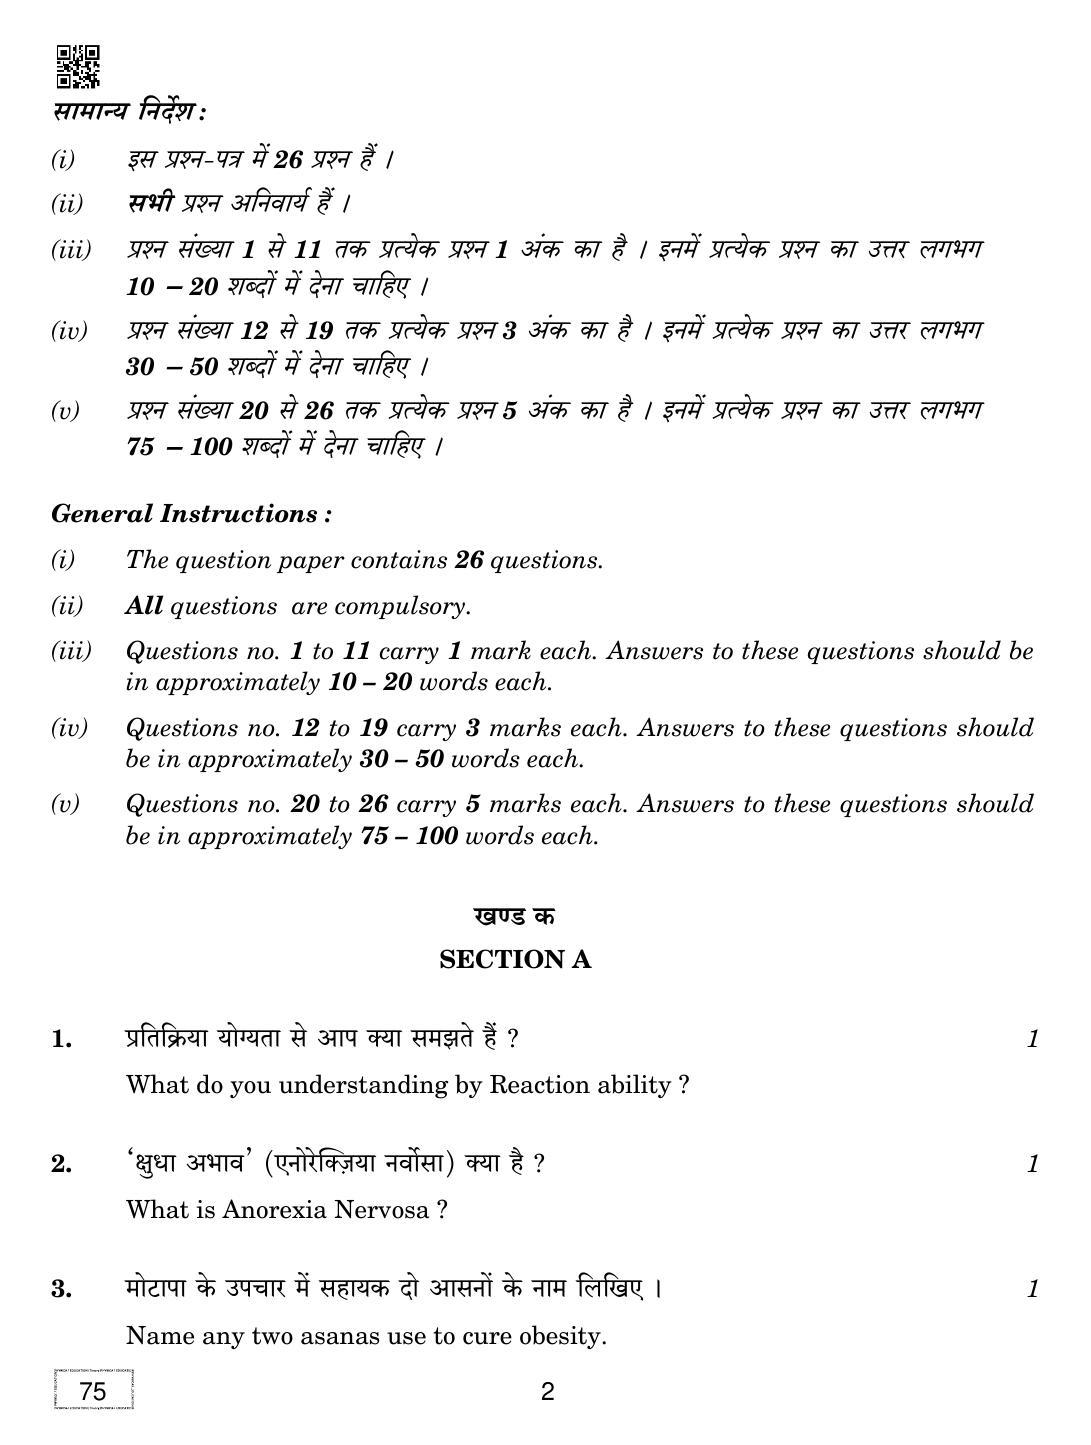 CBSE Class 12 75 PHYSICAL EDUCATION 2019 Compartment Question Paper - Page 2